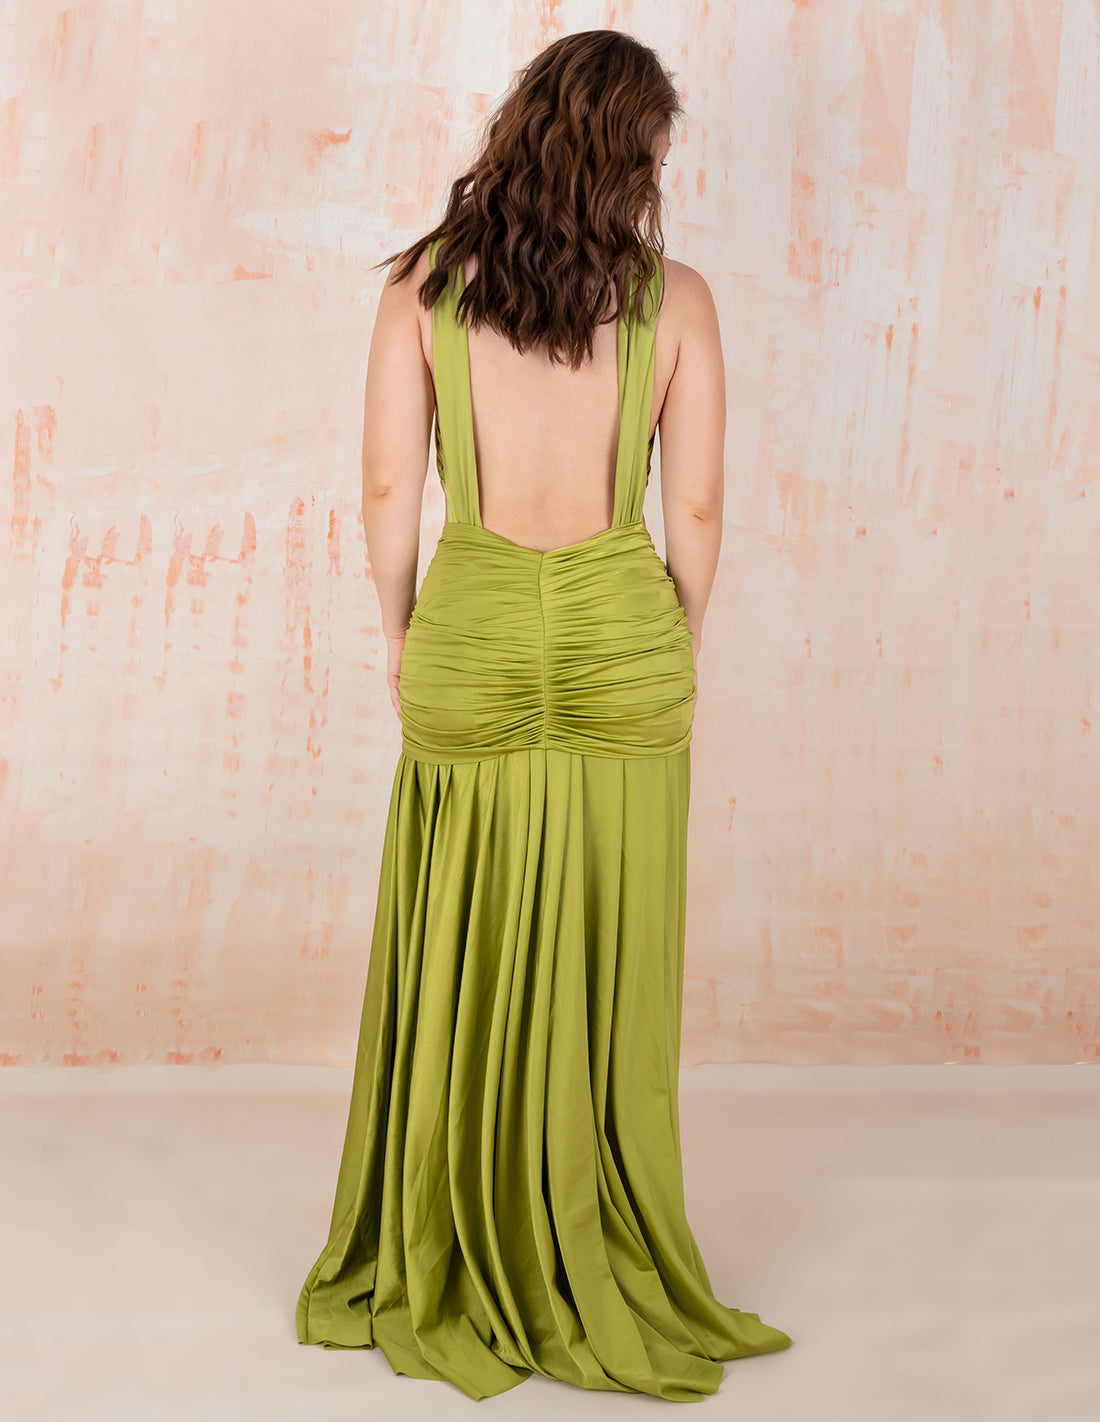 Tresser Dress Lime Green. Hand-Dyed Dress In Lime Green. Entreaguas